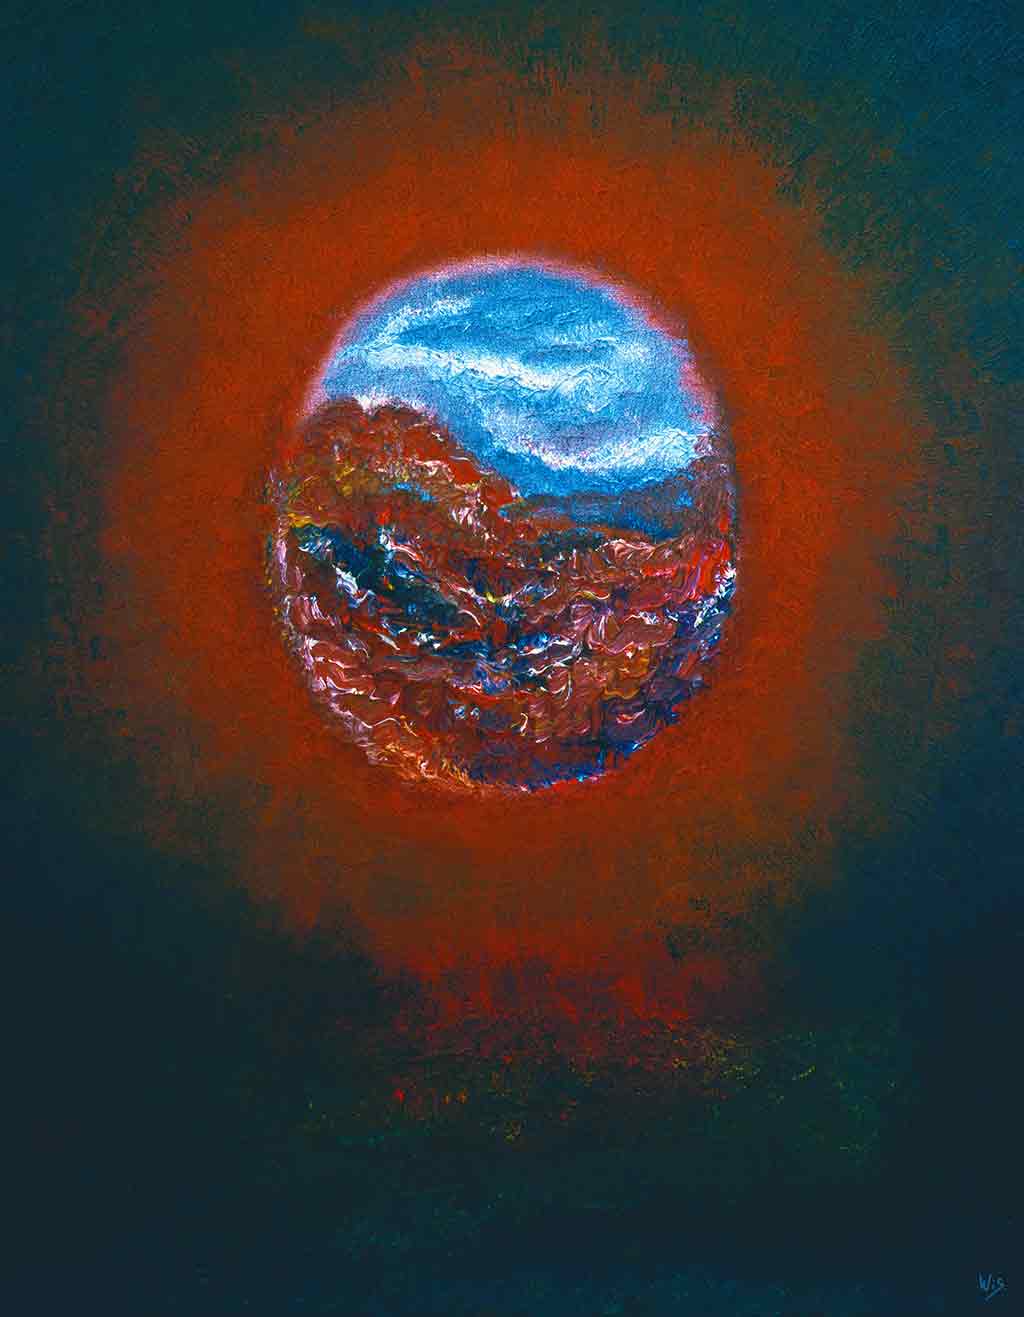 Oil painting titled 'Brahma Egg' by Wiesław Sadurski, depicting an egg-shaped landscape in vibrant red and green auras.